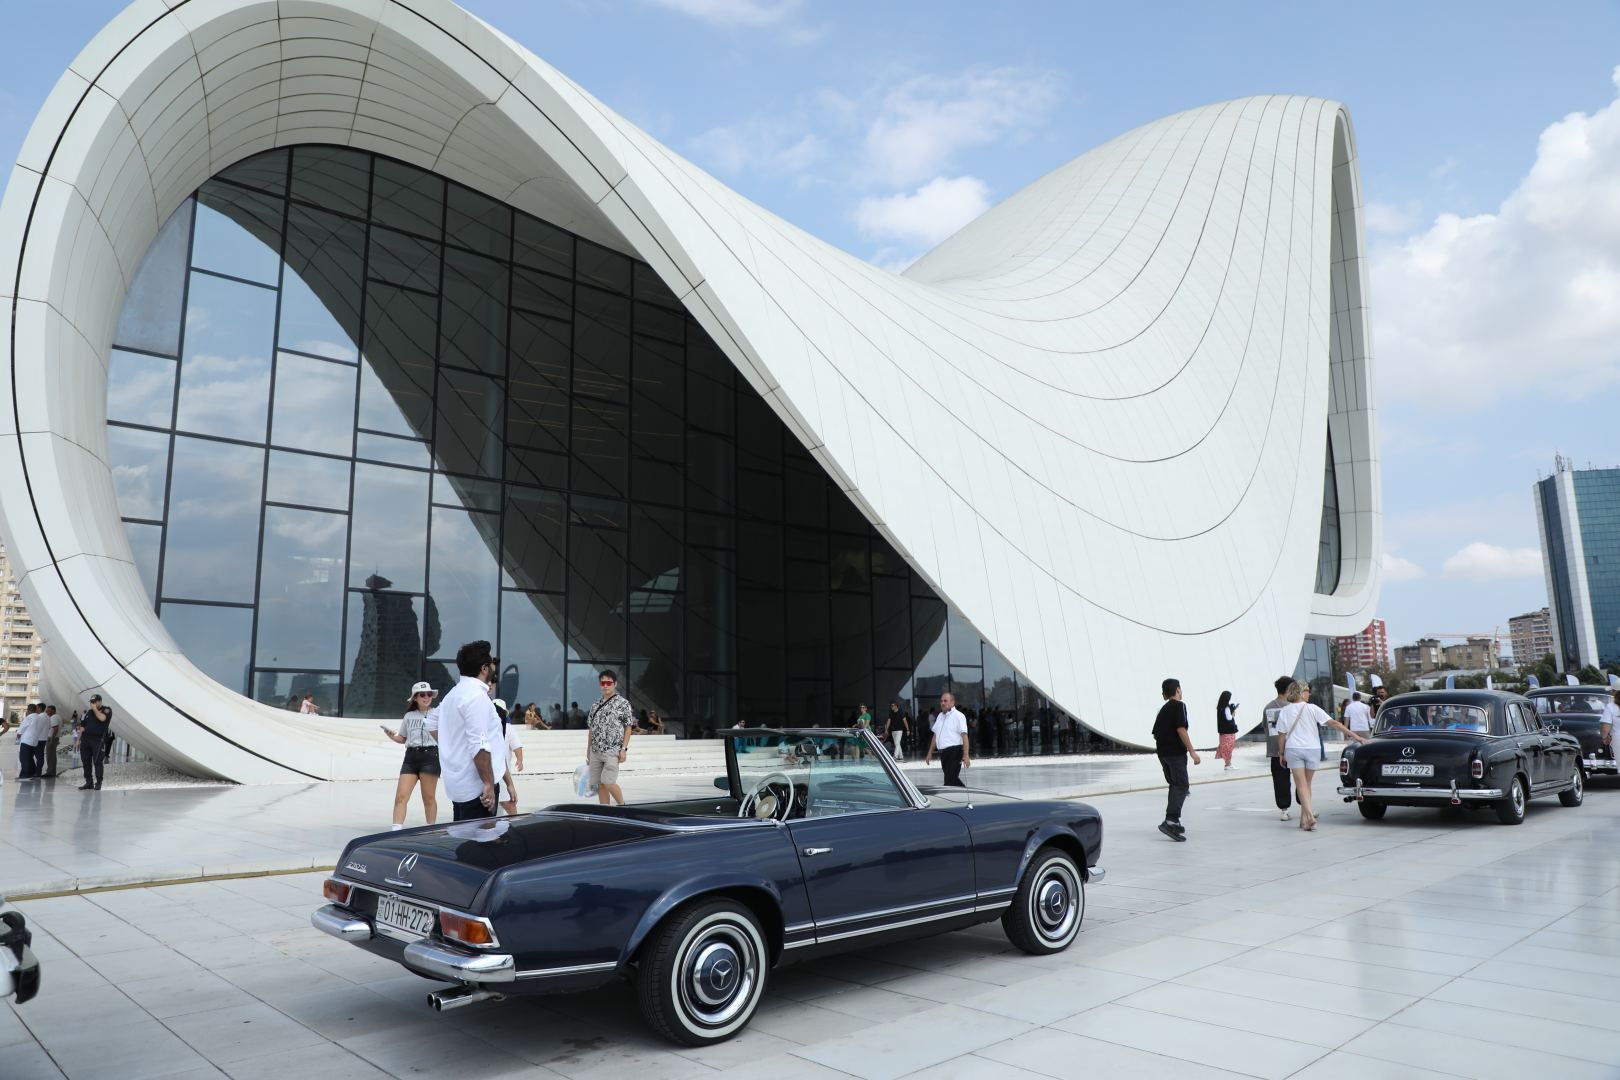 Baku hosts motor rally and exhibition of classic cars [PHOTOS/VIDEO]